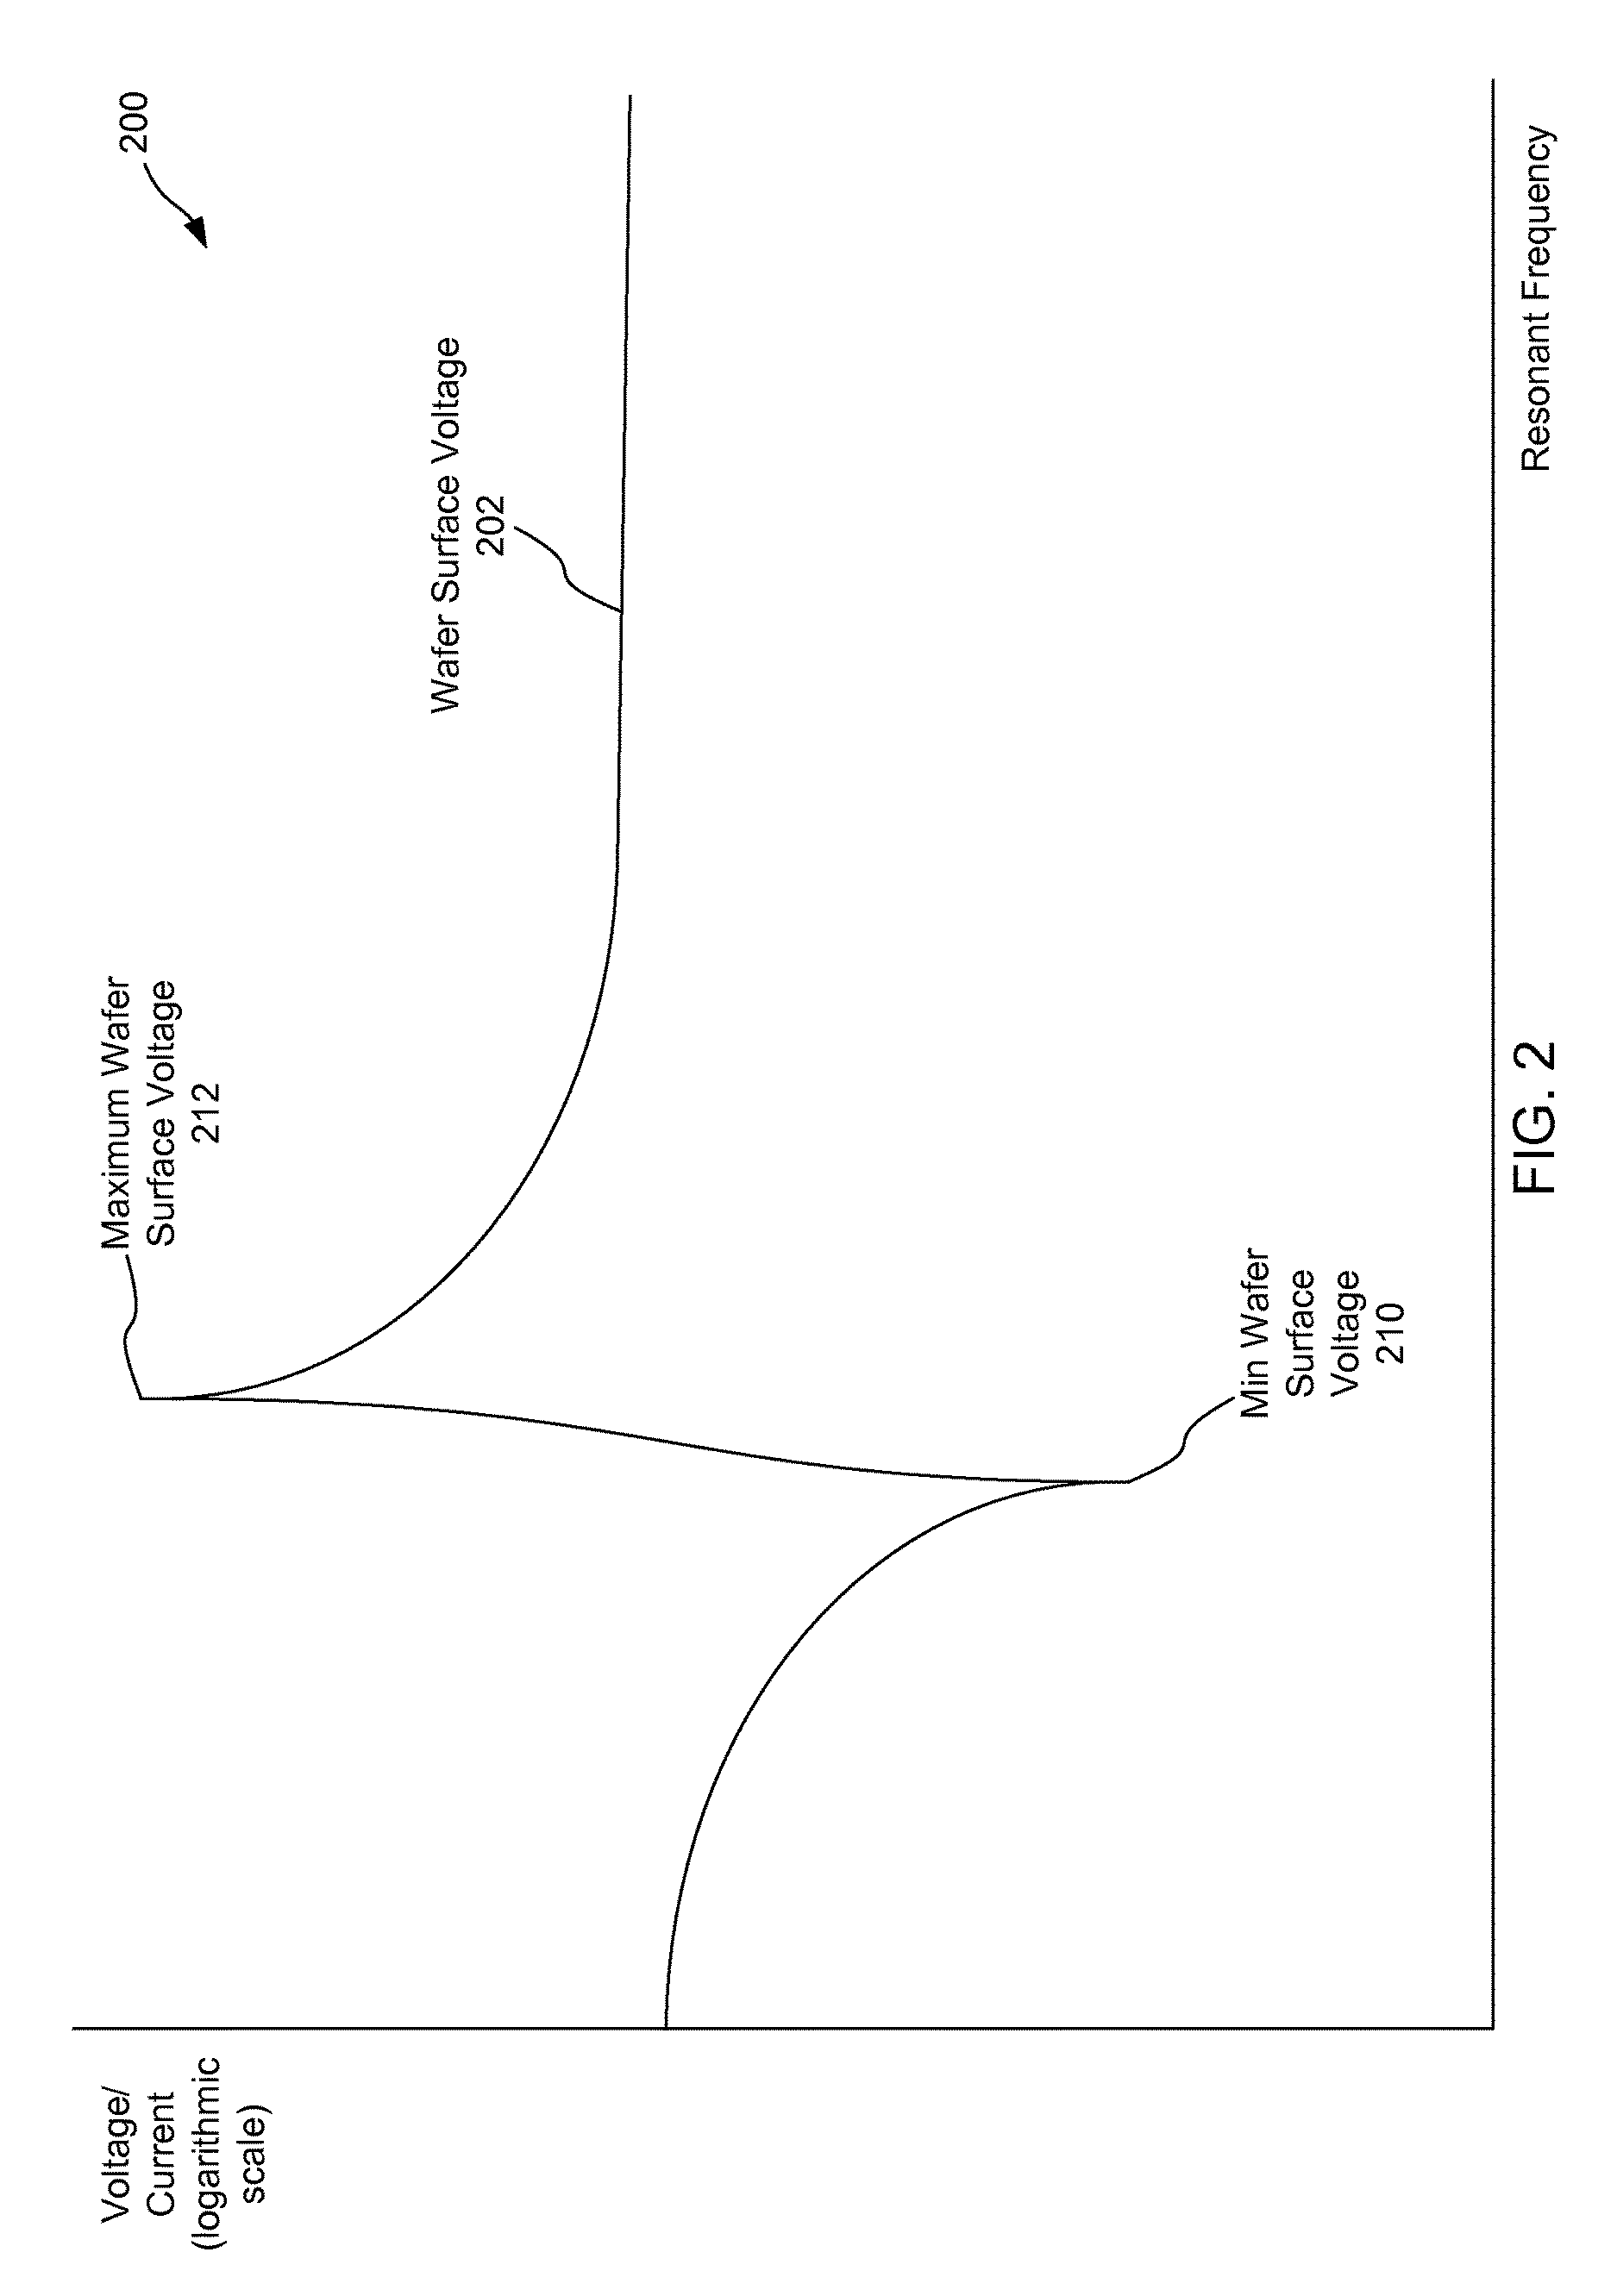 Systems, methods, and apparatus for minimizing cross coupled wafer surface potentials